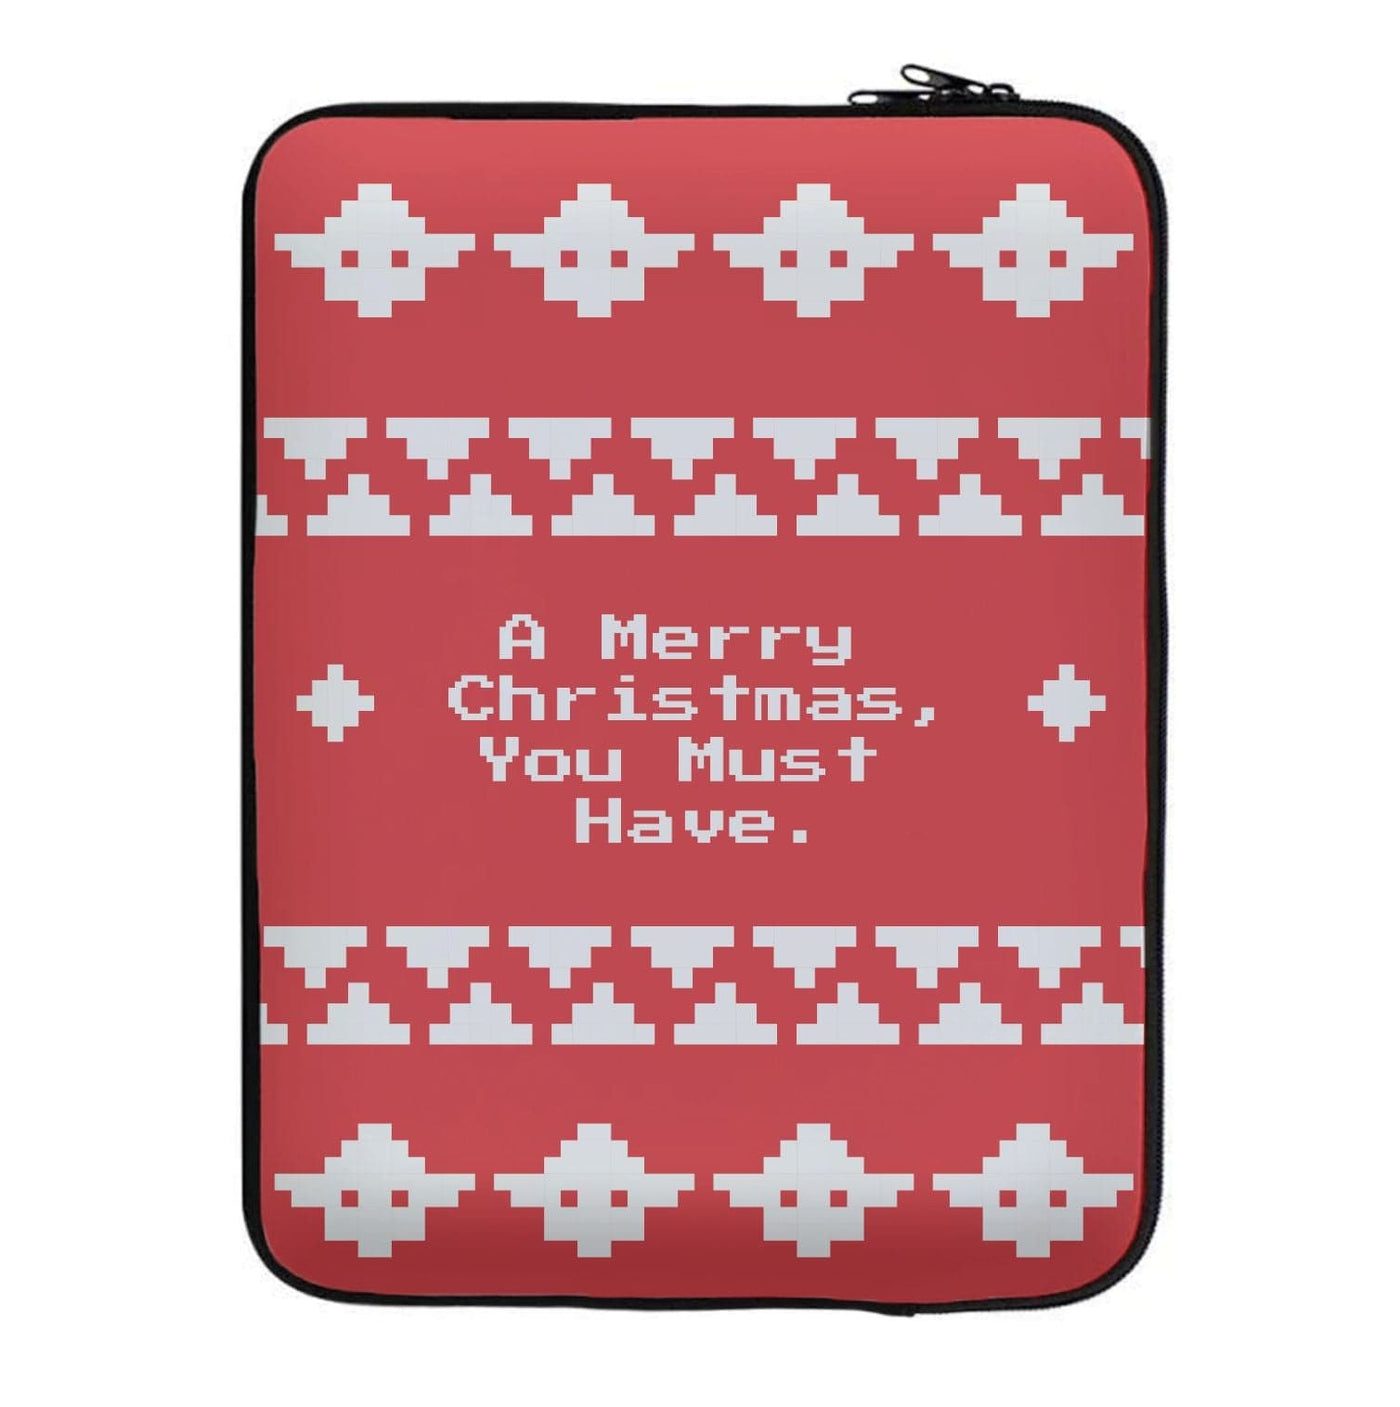 A Merry Christmas You Must Have - Star Wars Laptop Sleeve